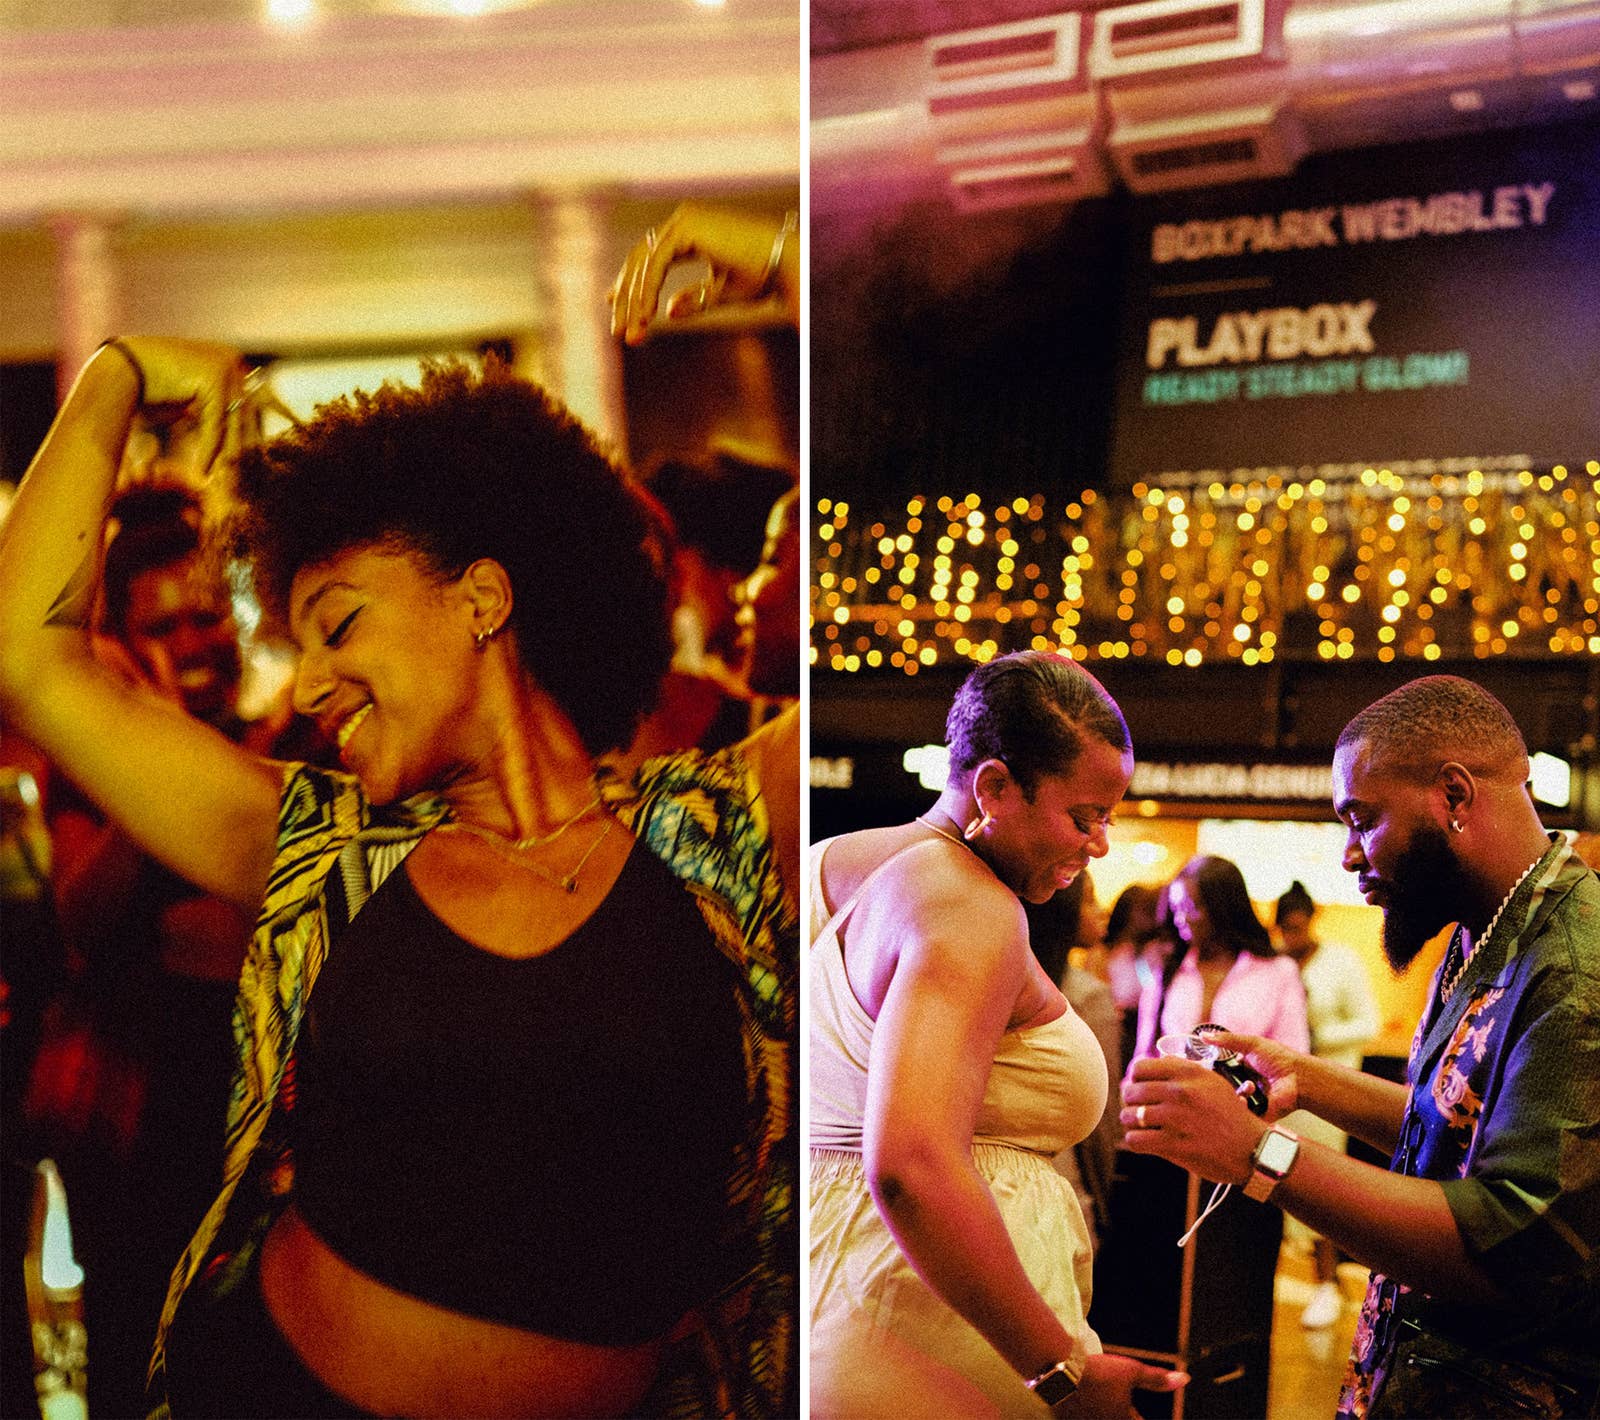 Left: An image of a Black woman smiling while dancing. Right: An image of a Black male/female couple enjoying a club.